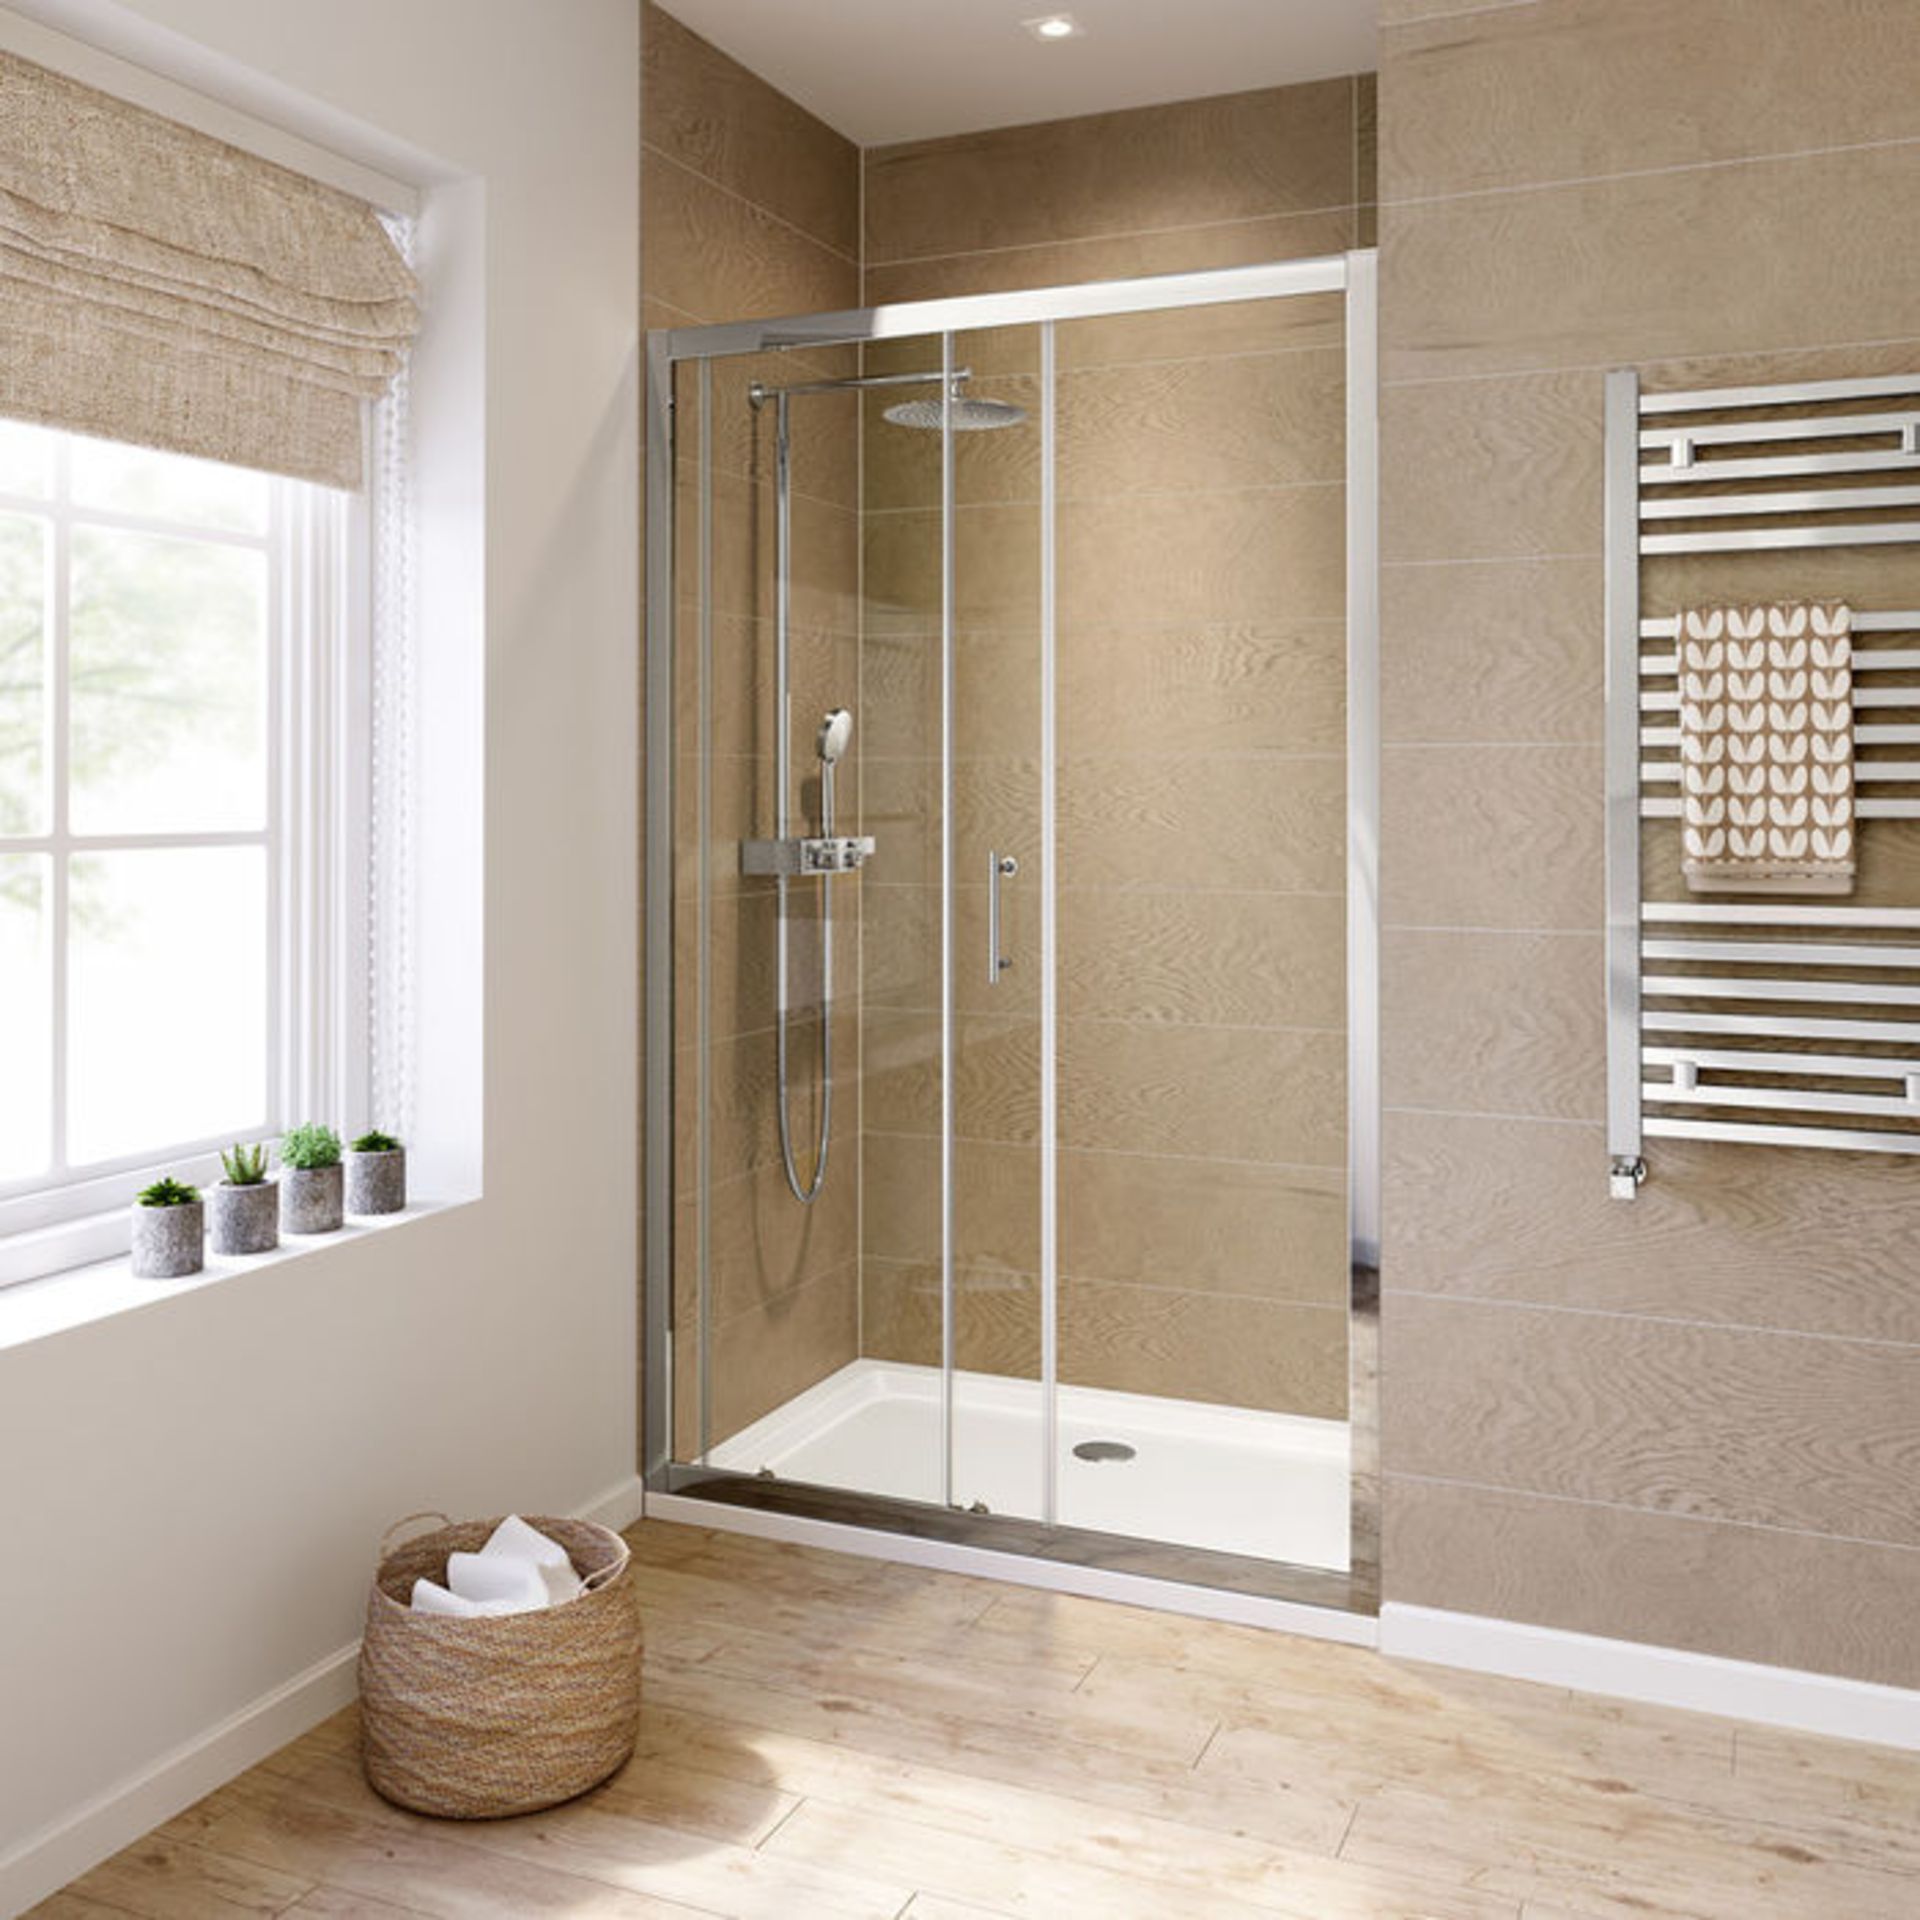 (GR30) 1200mm - 6mm - Elements Sliding Shower Door RRP £299.99. Polished Aluminium Frame with a - Image 3 of 6